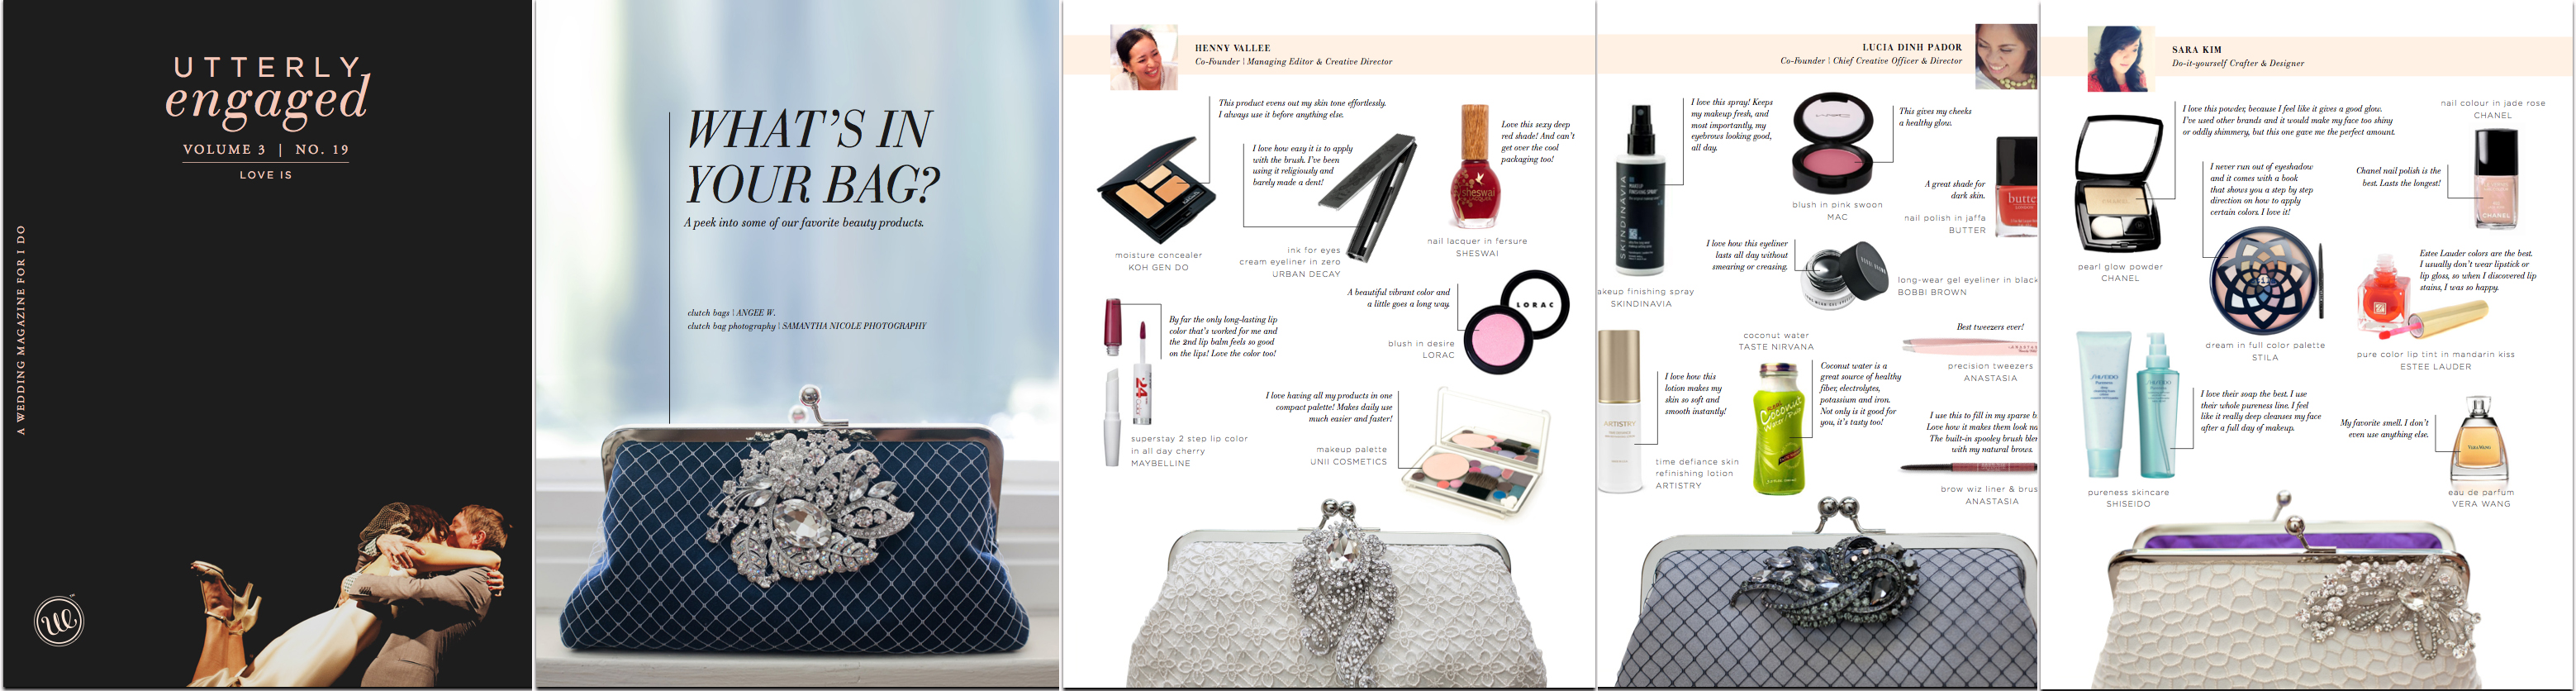 Utterly Engaged - February 2012 - ANGEE W. bridesmaids clutch bags